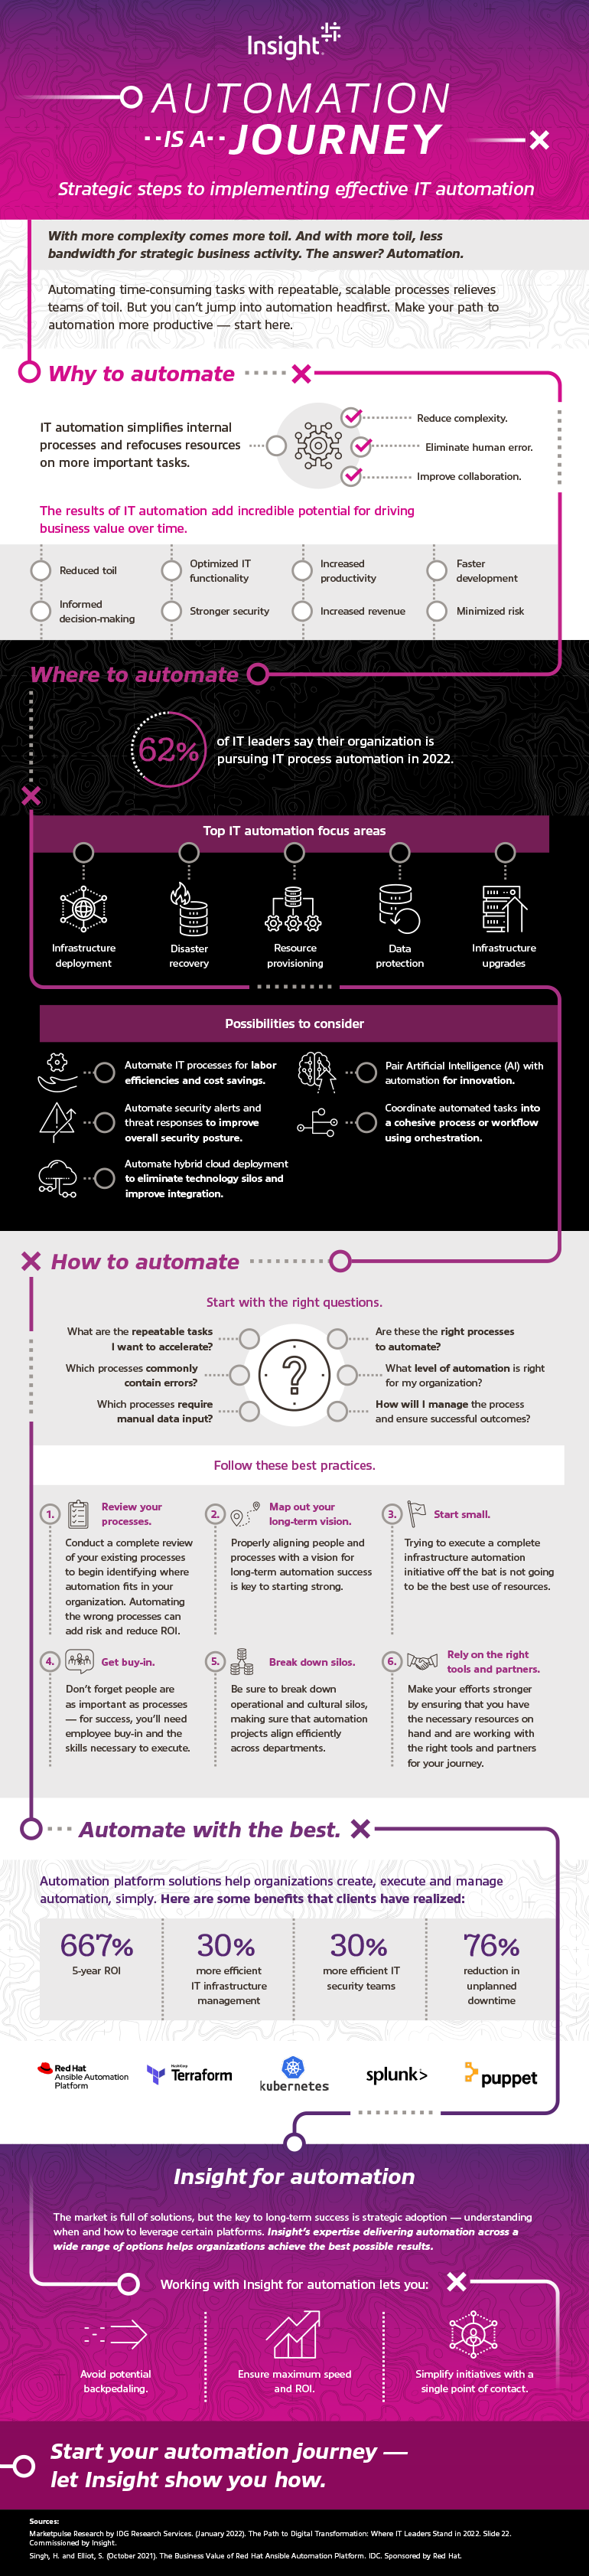 Automation is a Journey infographic